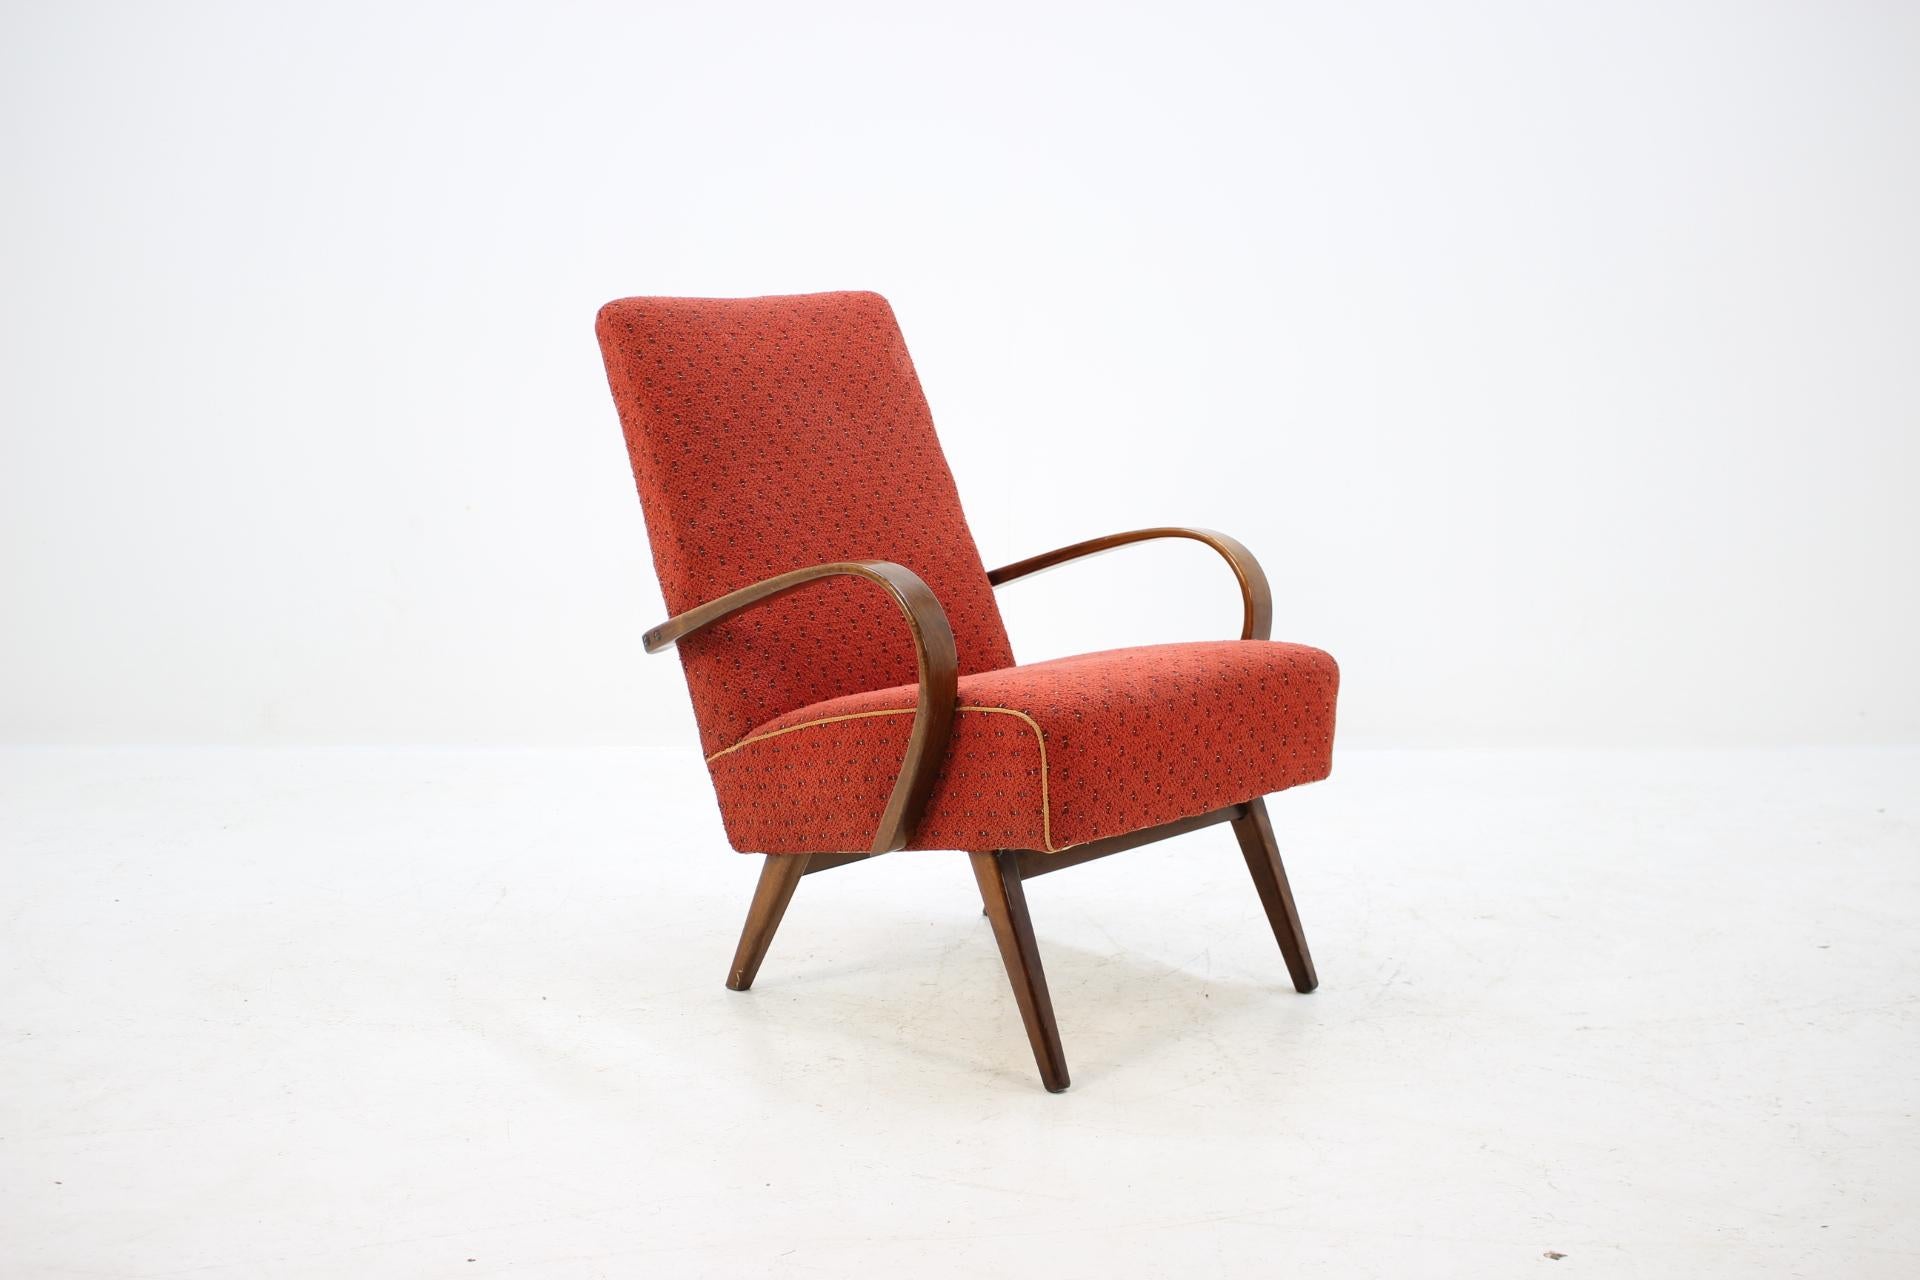 This chair was made in Czech Republic during 1960s by Thon company (before Thonet). Legs and bentwood armrests are made from beech wood and have been re-polished. Good original fabric upholstery with no holes.